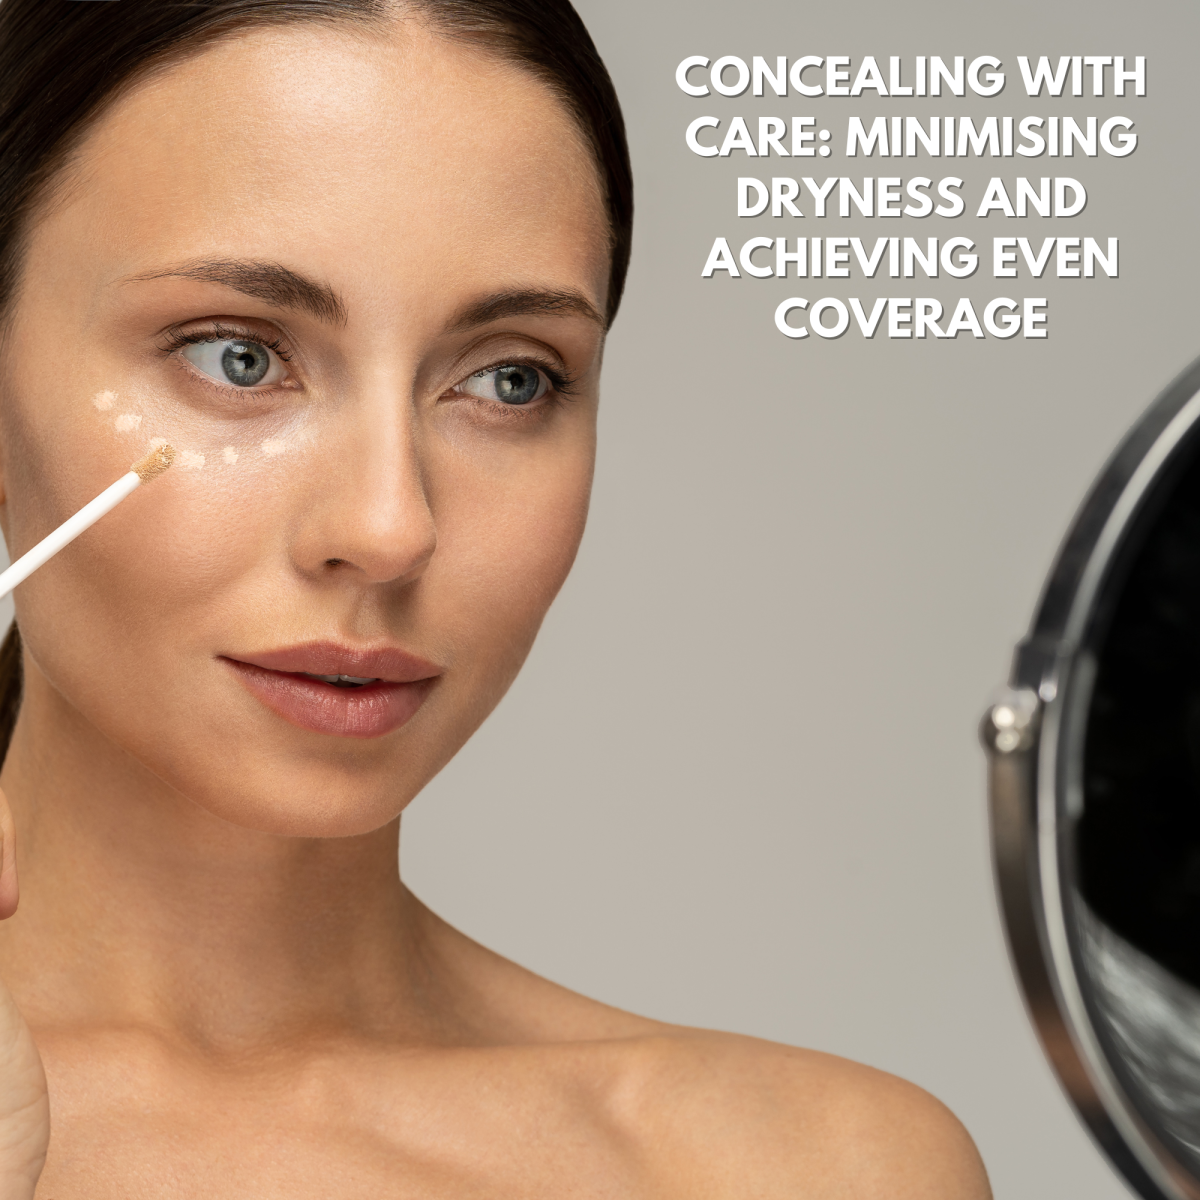 Concealing With Care: Minimising Dryness and Achieving Even Coverage